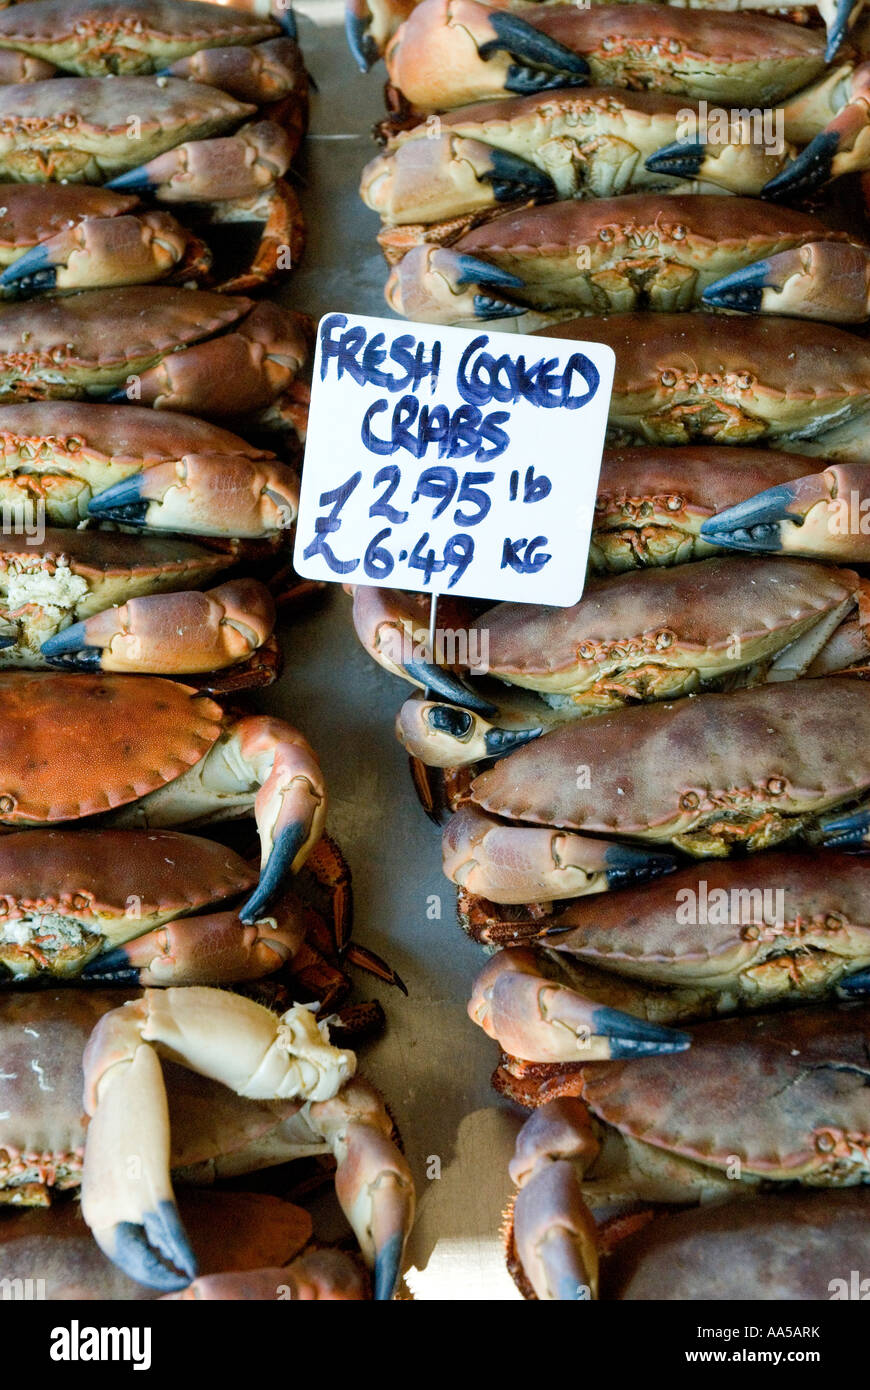 Fresh cooked local crabs Rock a Nore Fisheries fish shop Hastings Old Town East Sussex UK Stock Photo